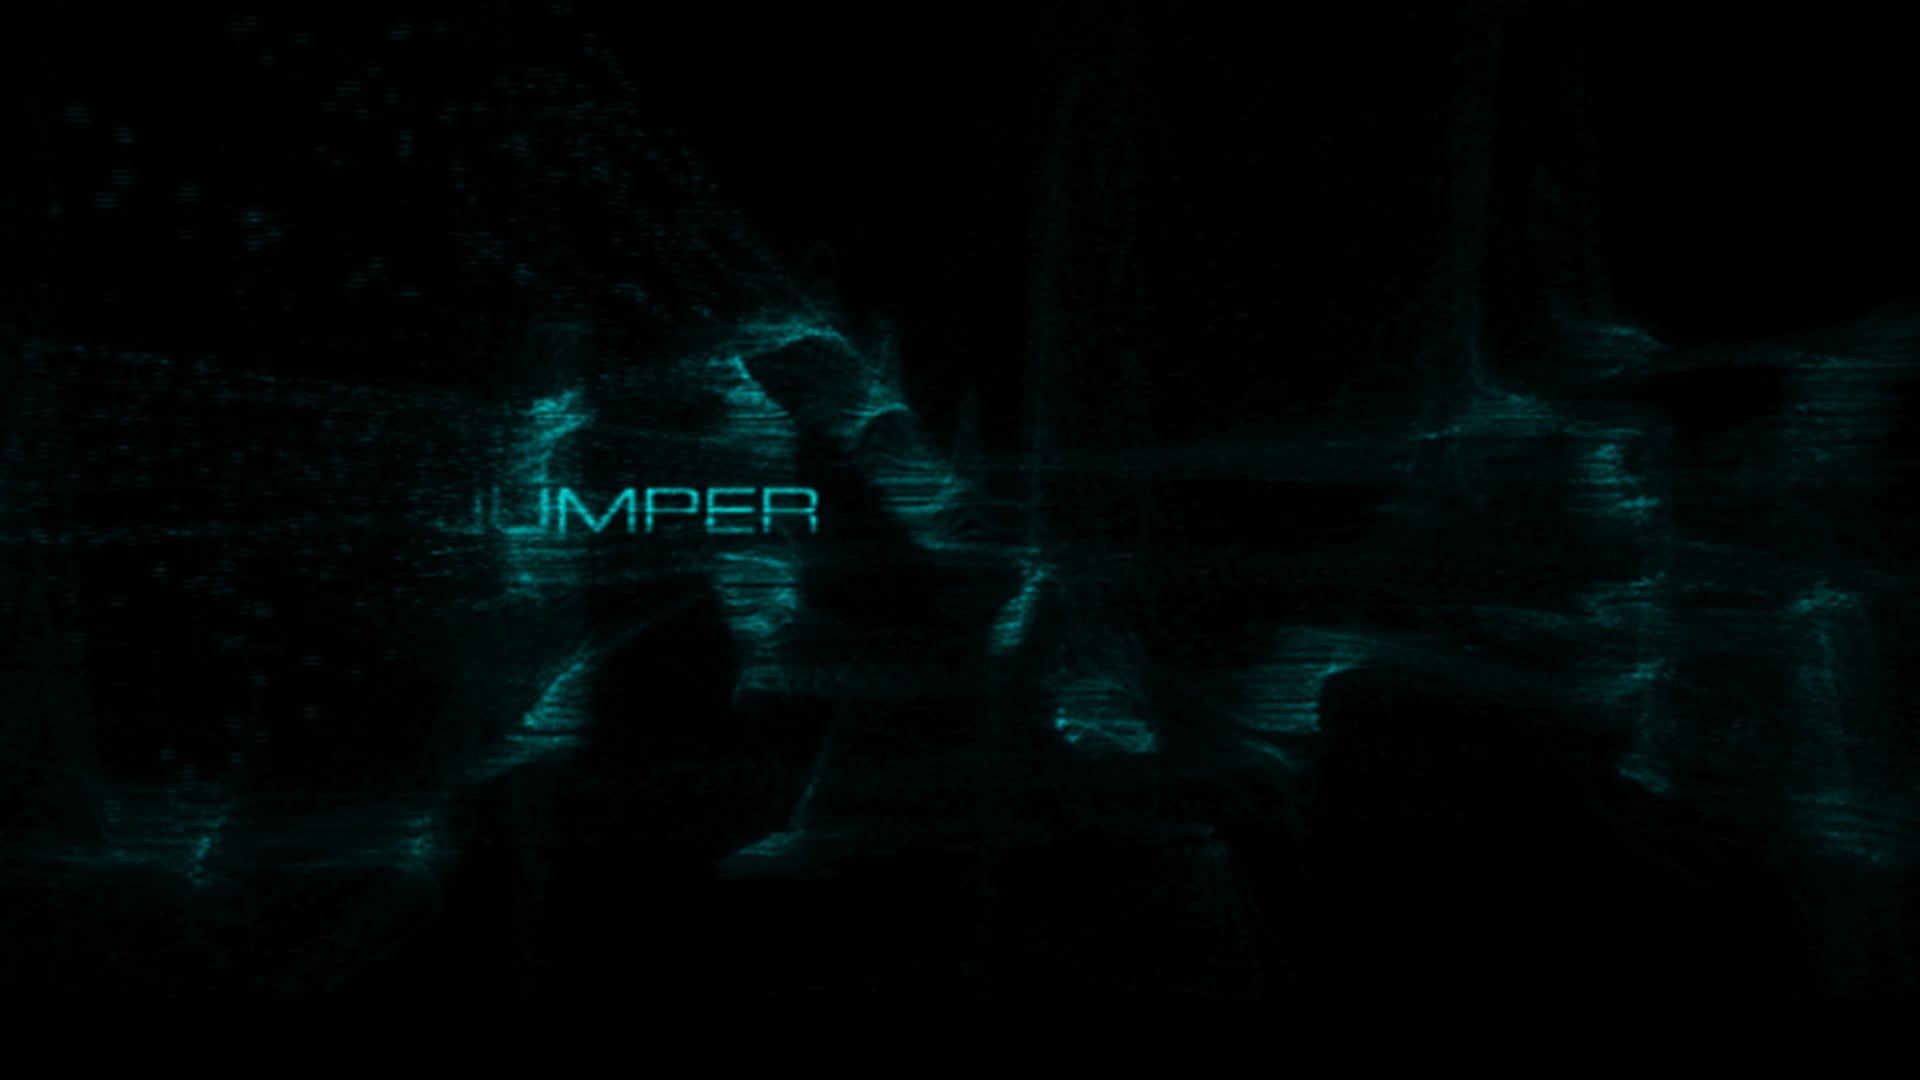 Jumper - Main Title Sequence